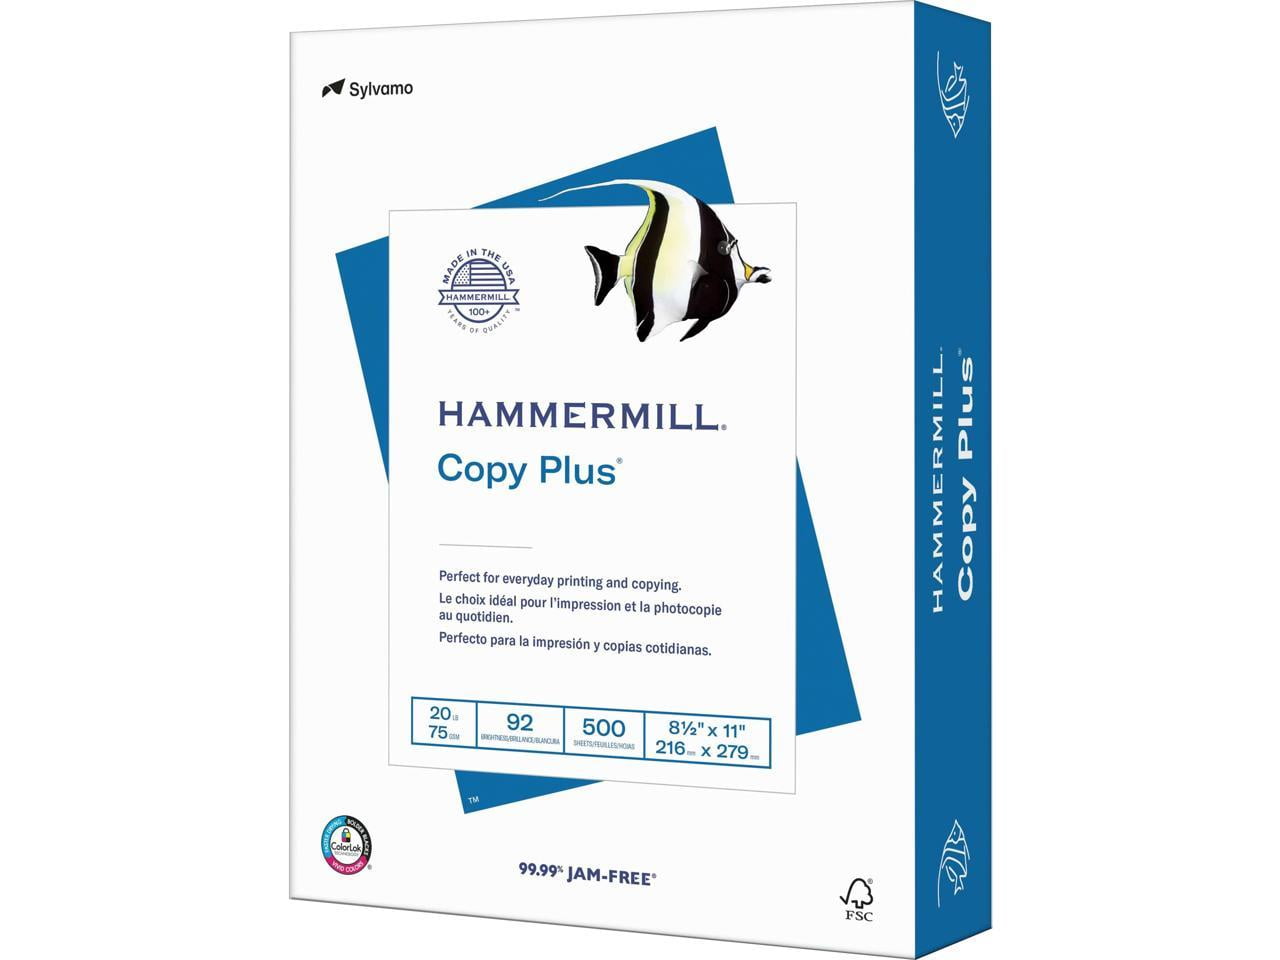   Basics Multipurpose Copy Printer Paper, 8.5 x 11, 20  lb, 8 Reams, 4000 Sheets, 92 Bright, White : Office Products